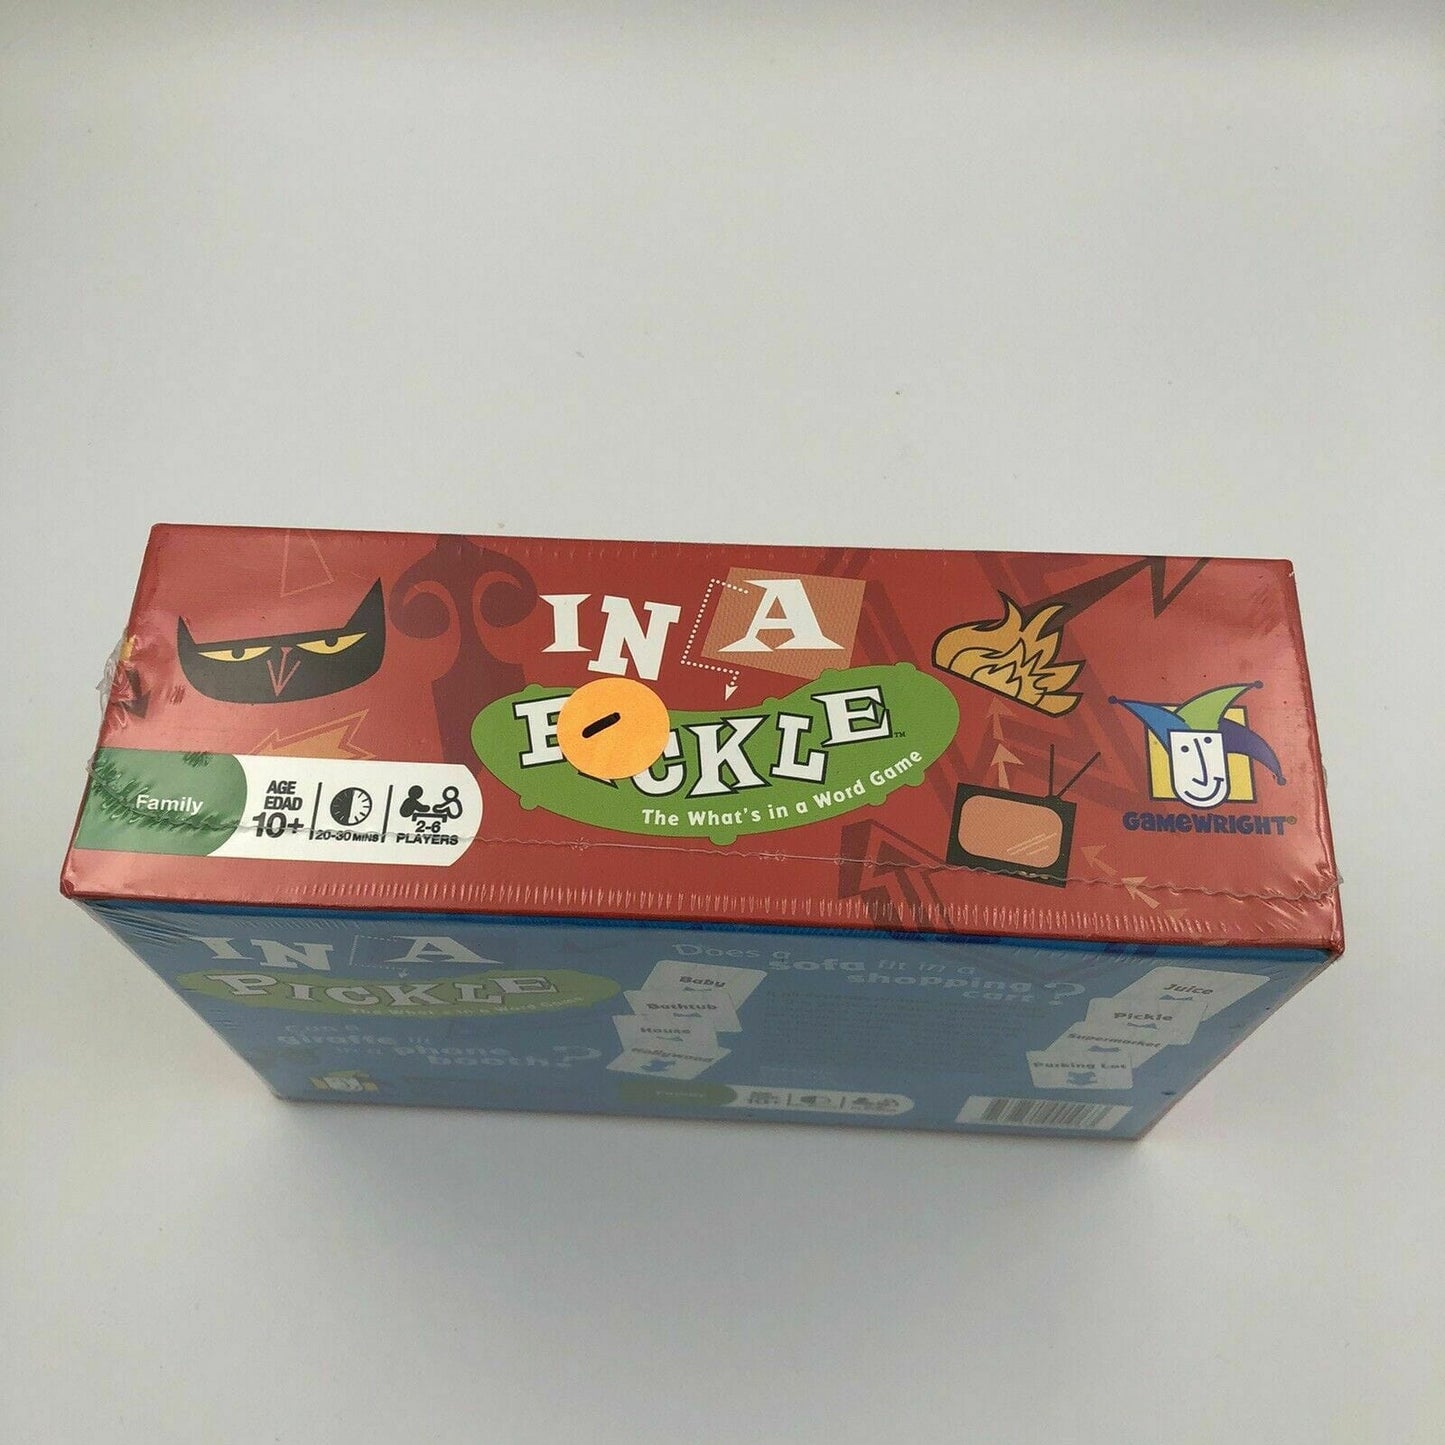 NEW Gamewright Game In A Pickle 120209-75975-A